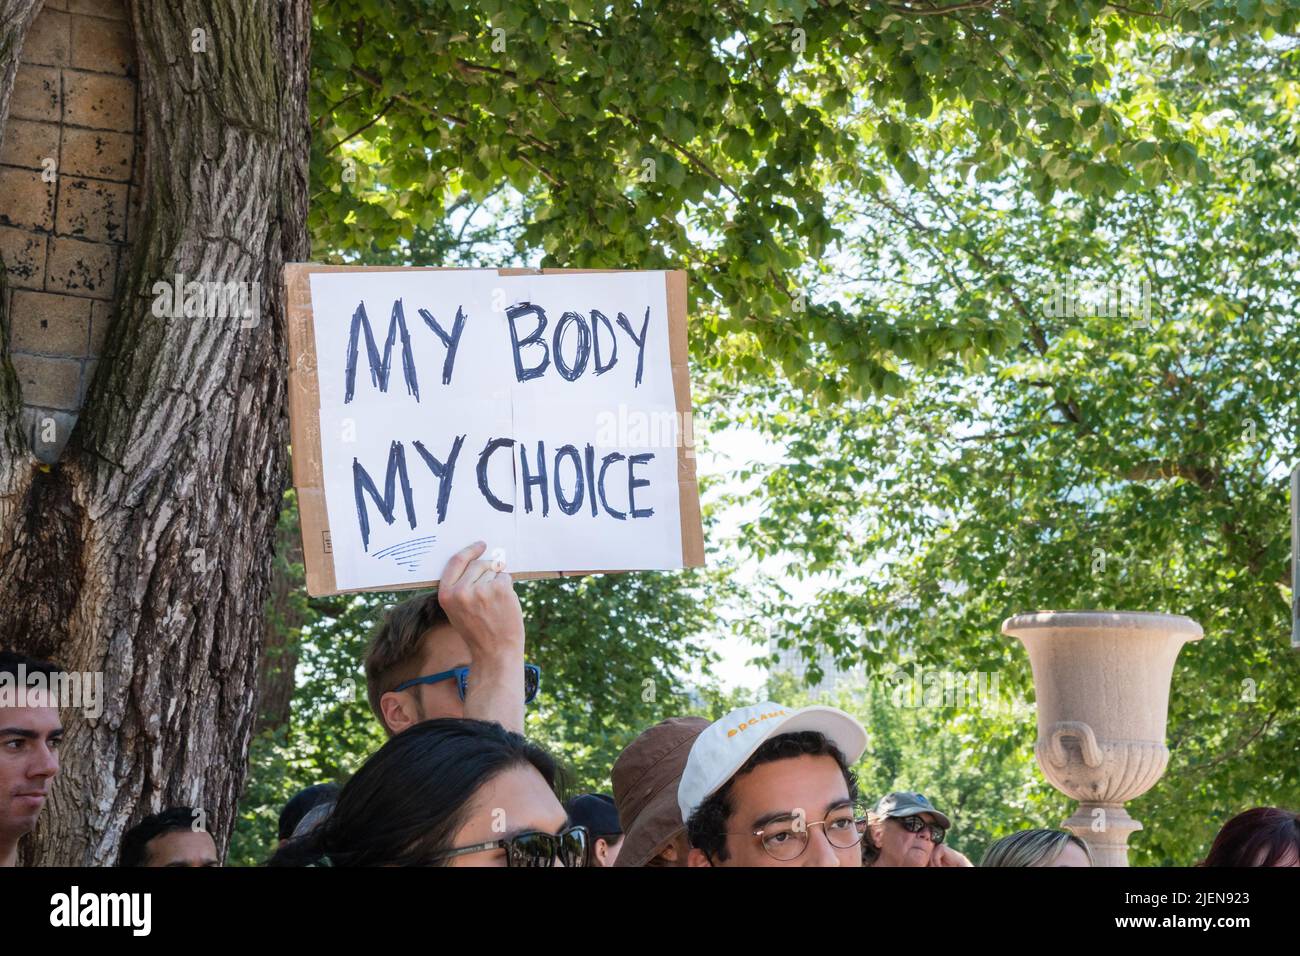 Protests holding pro-abortion signs at demonstration in response to the Supreme Court ruling overturning Roe v. Wade at the Massachusetts State House Stock Photo